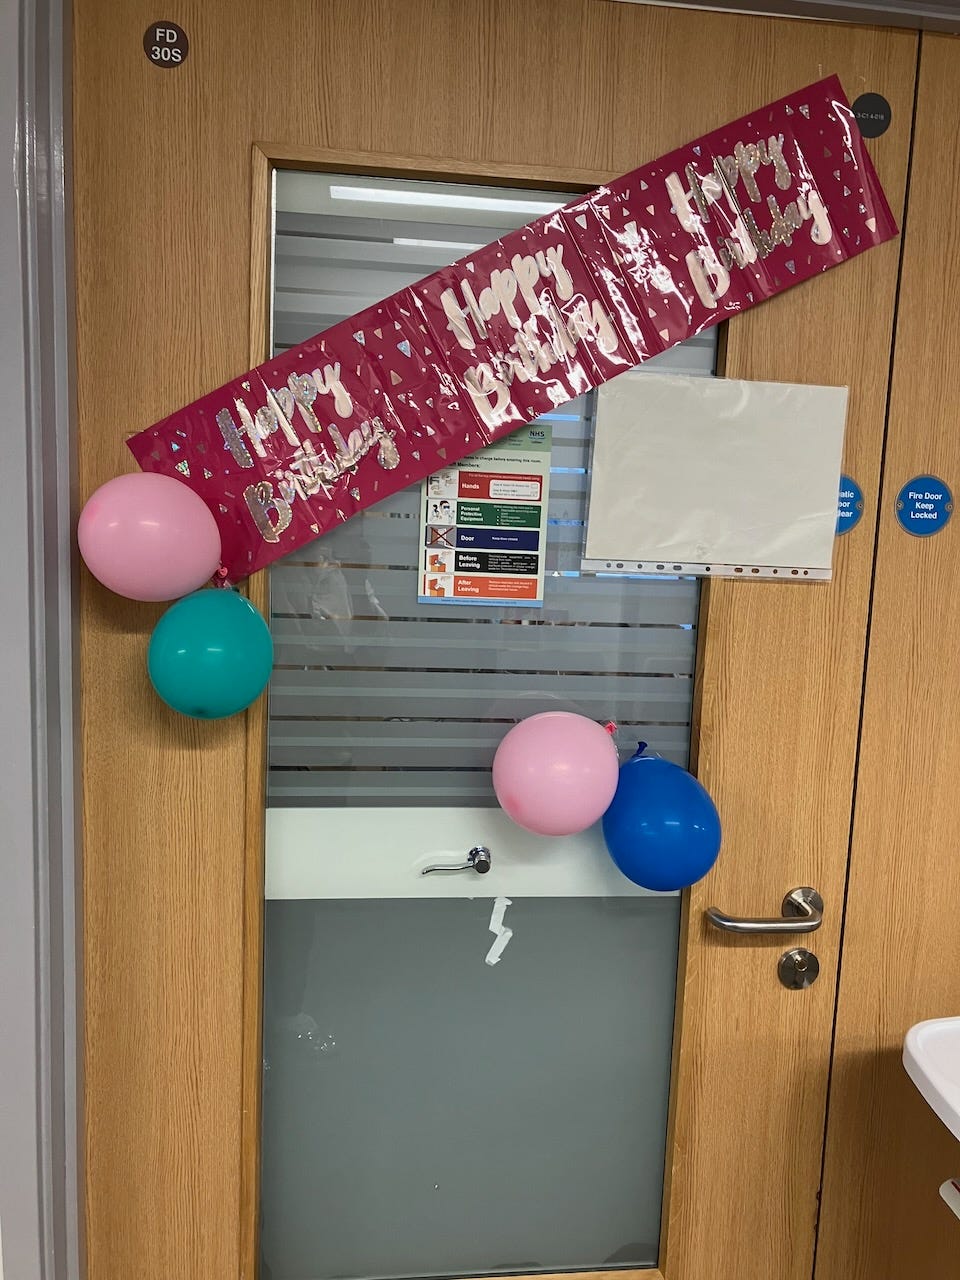 My child’s hospital door, decorated with balloons and a happy birthday banner for their birthday.